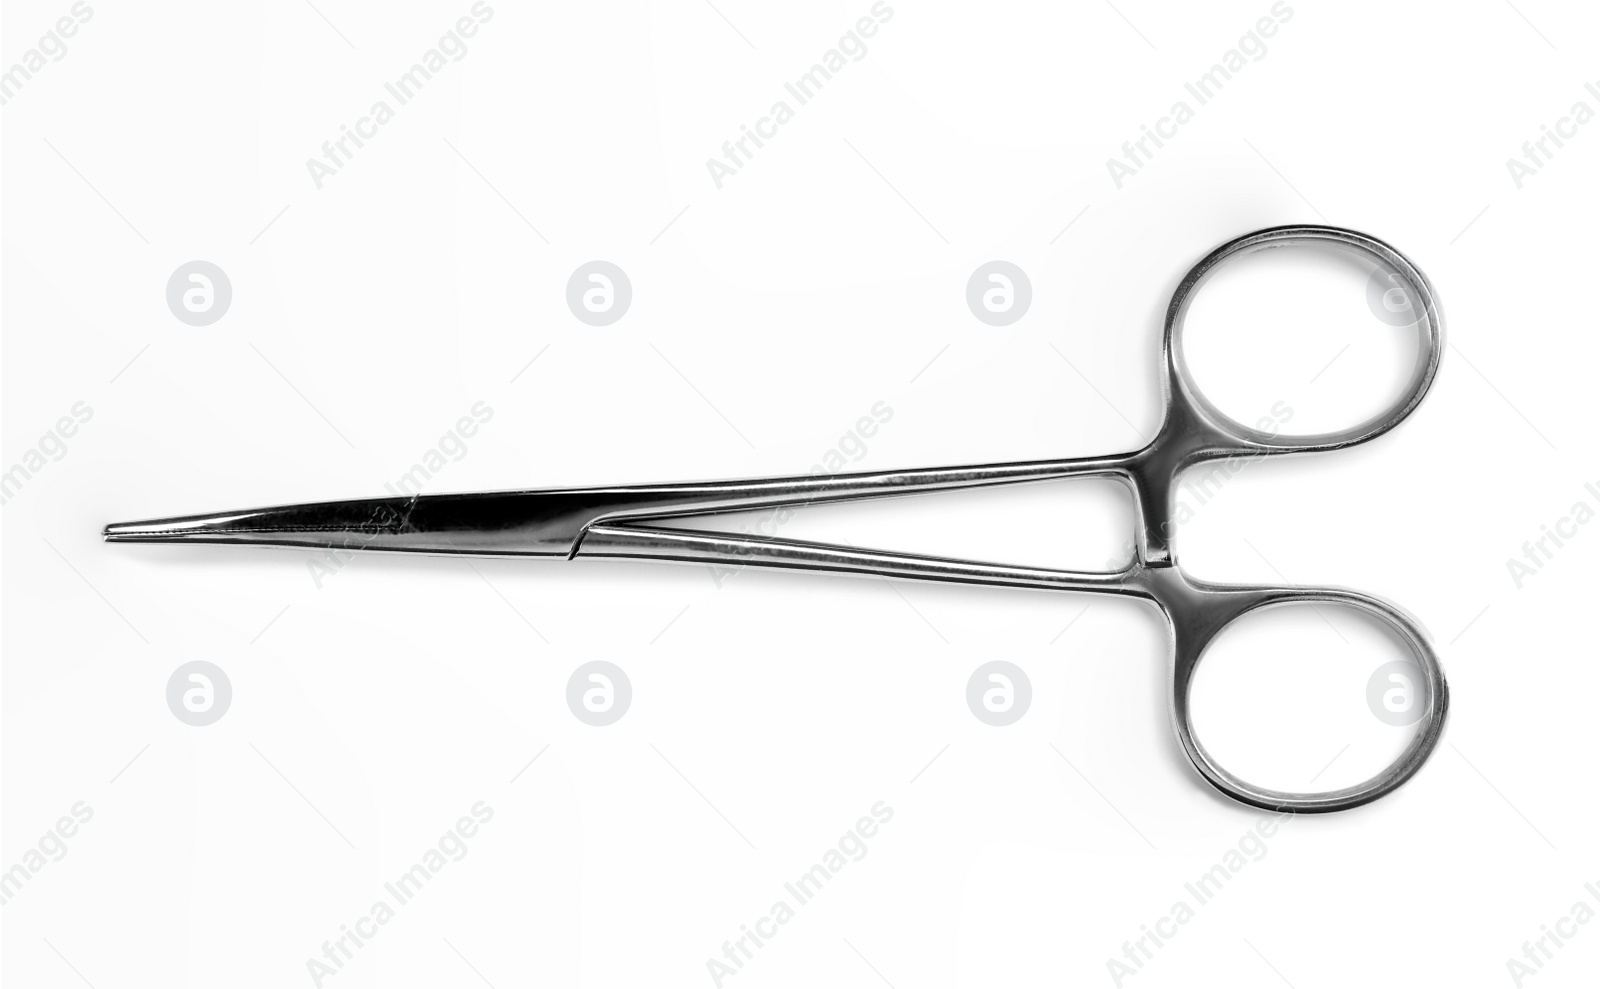 Photo of Surgical forceps on white background, top view. Medical tool